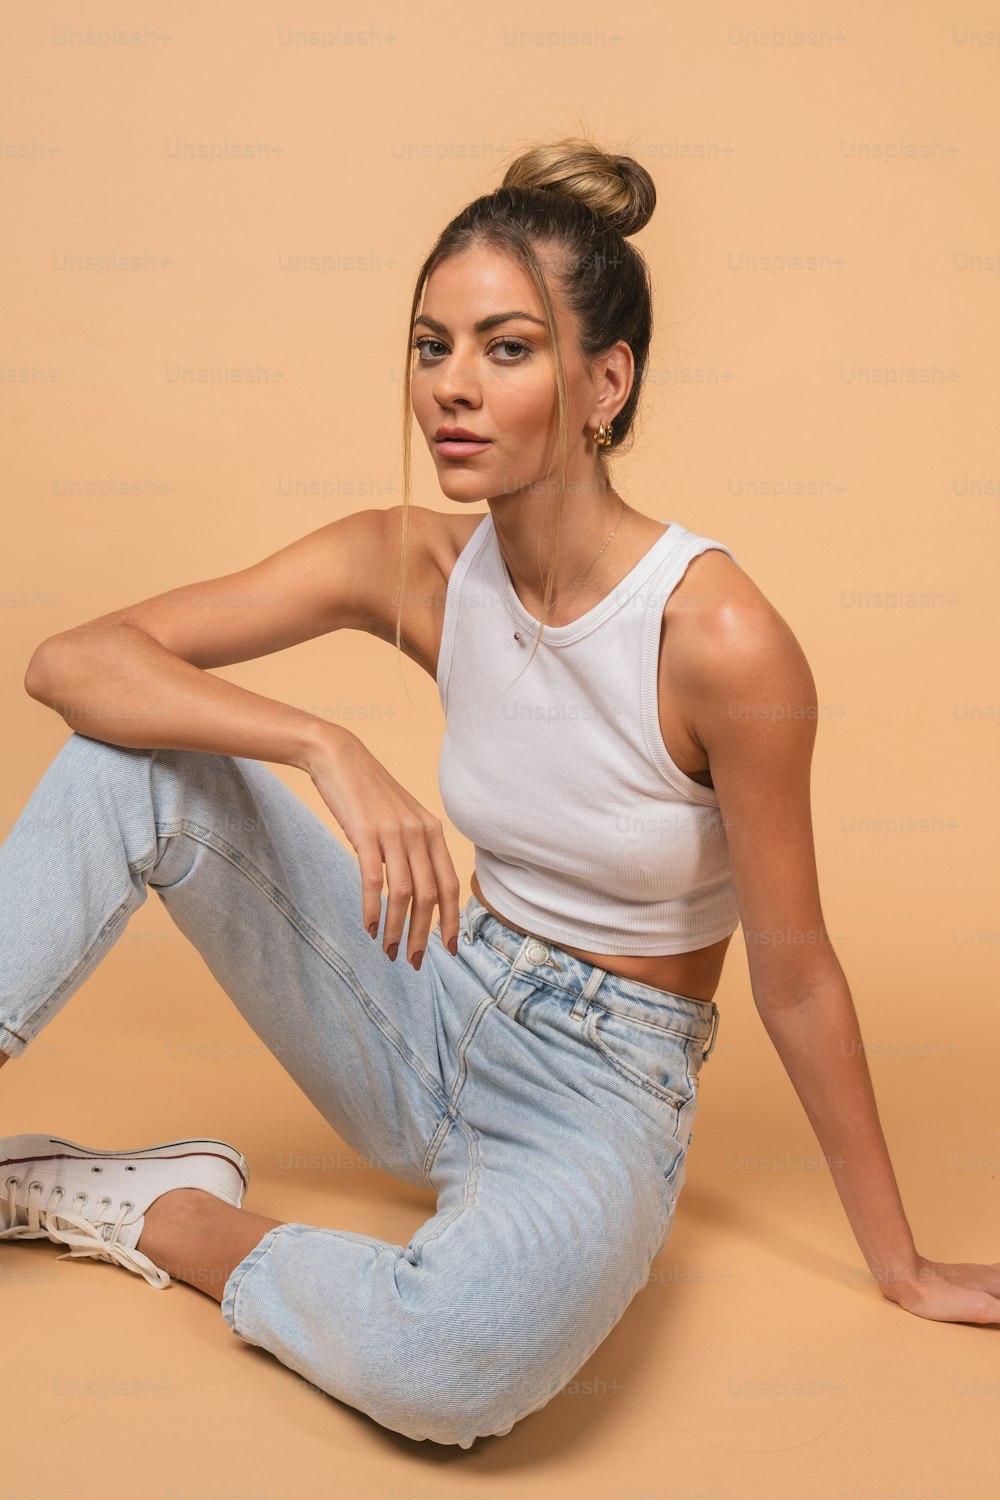 a woman is sitting on the floor wearing jeans and a tank top